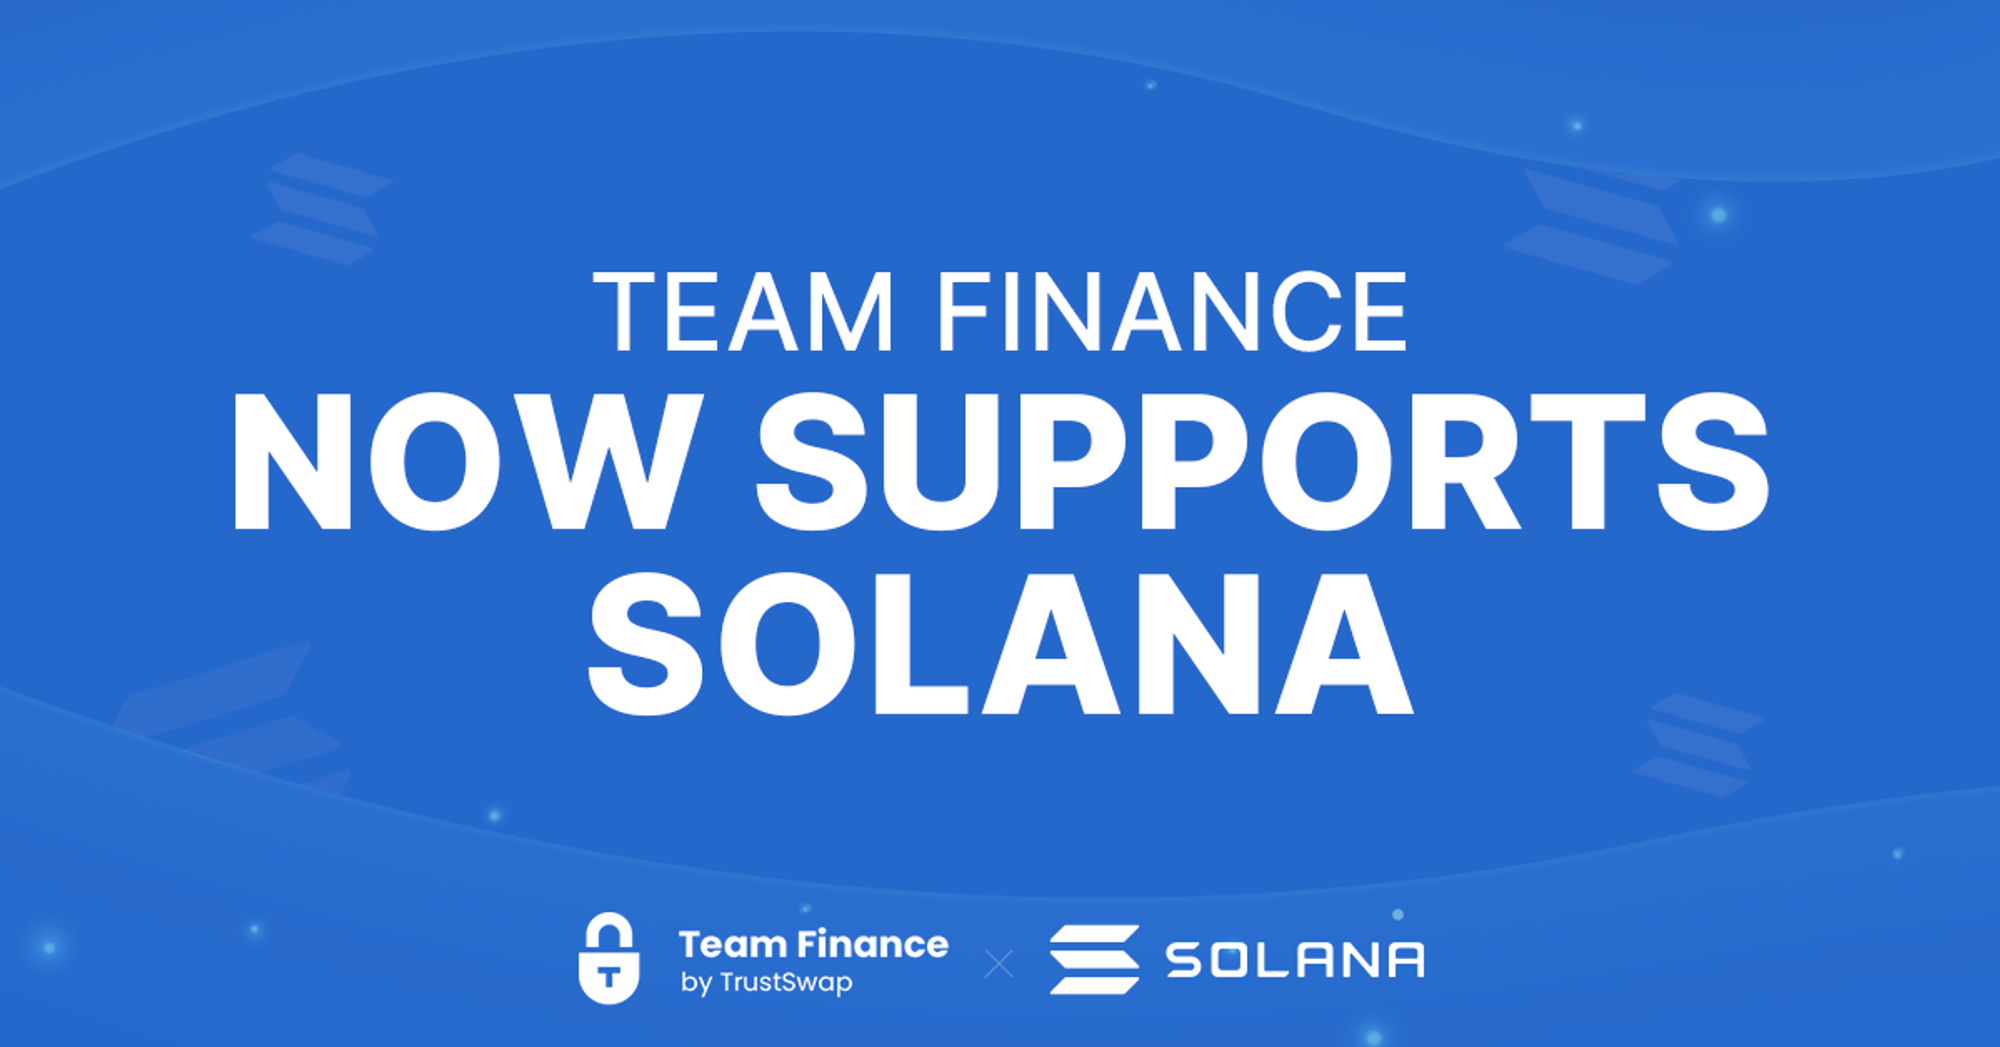 Build your Project on Solana with Team Finance!